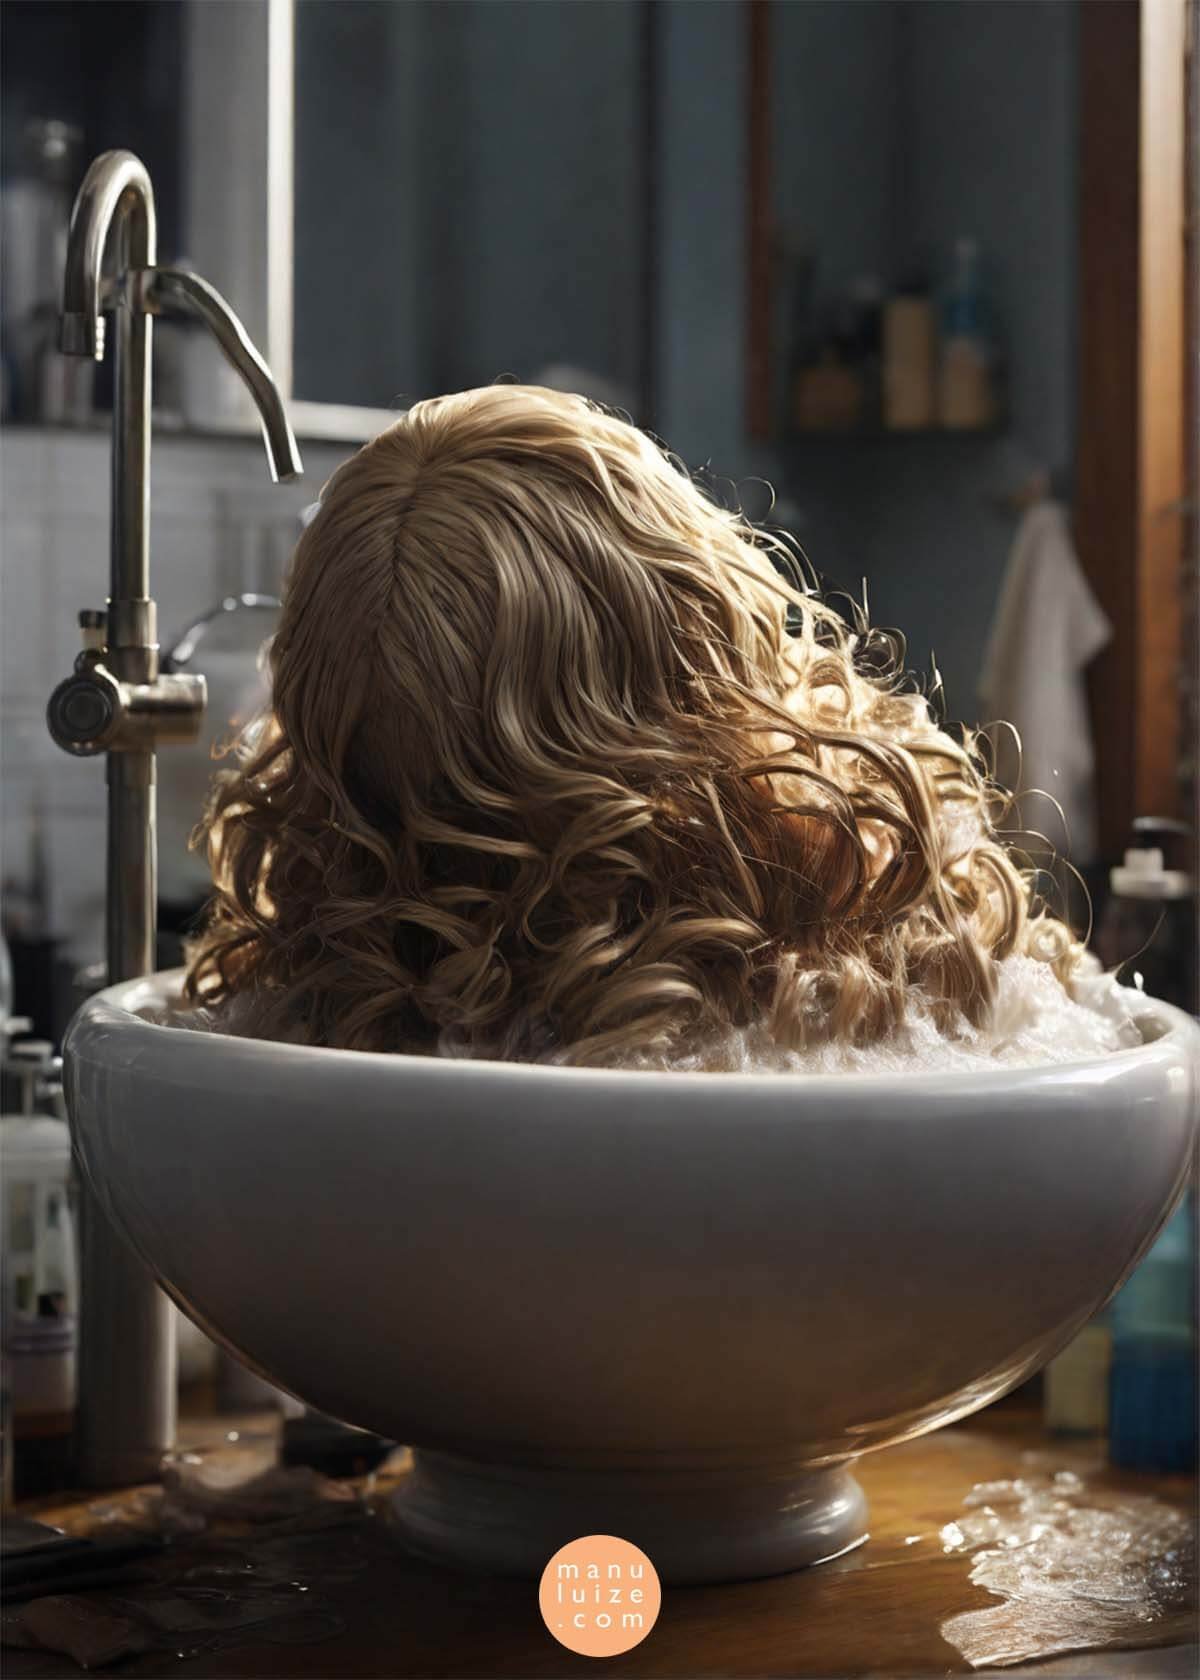 how to wash a wig: blonde wig in a sink